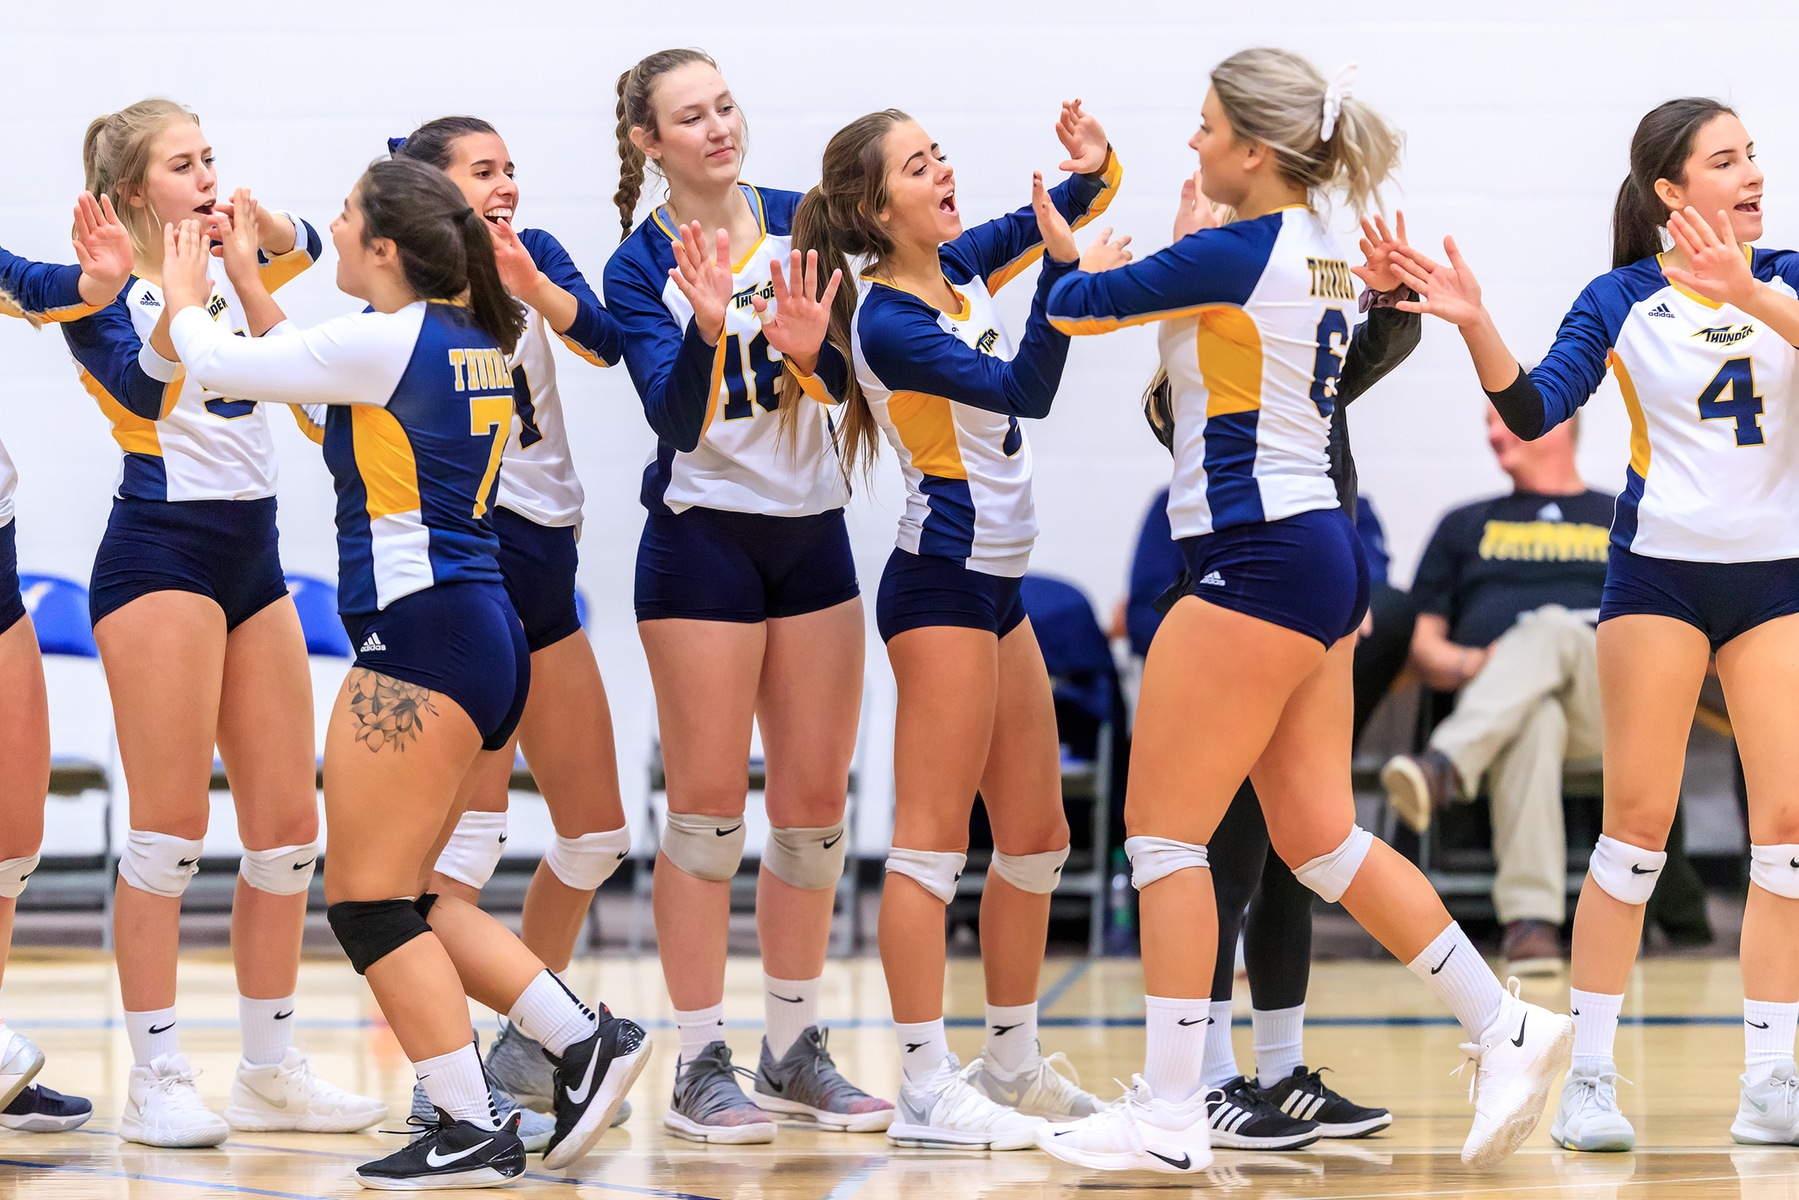 Thunder Open Up 2019 With a 5th Set Win